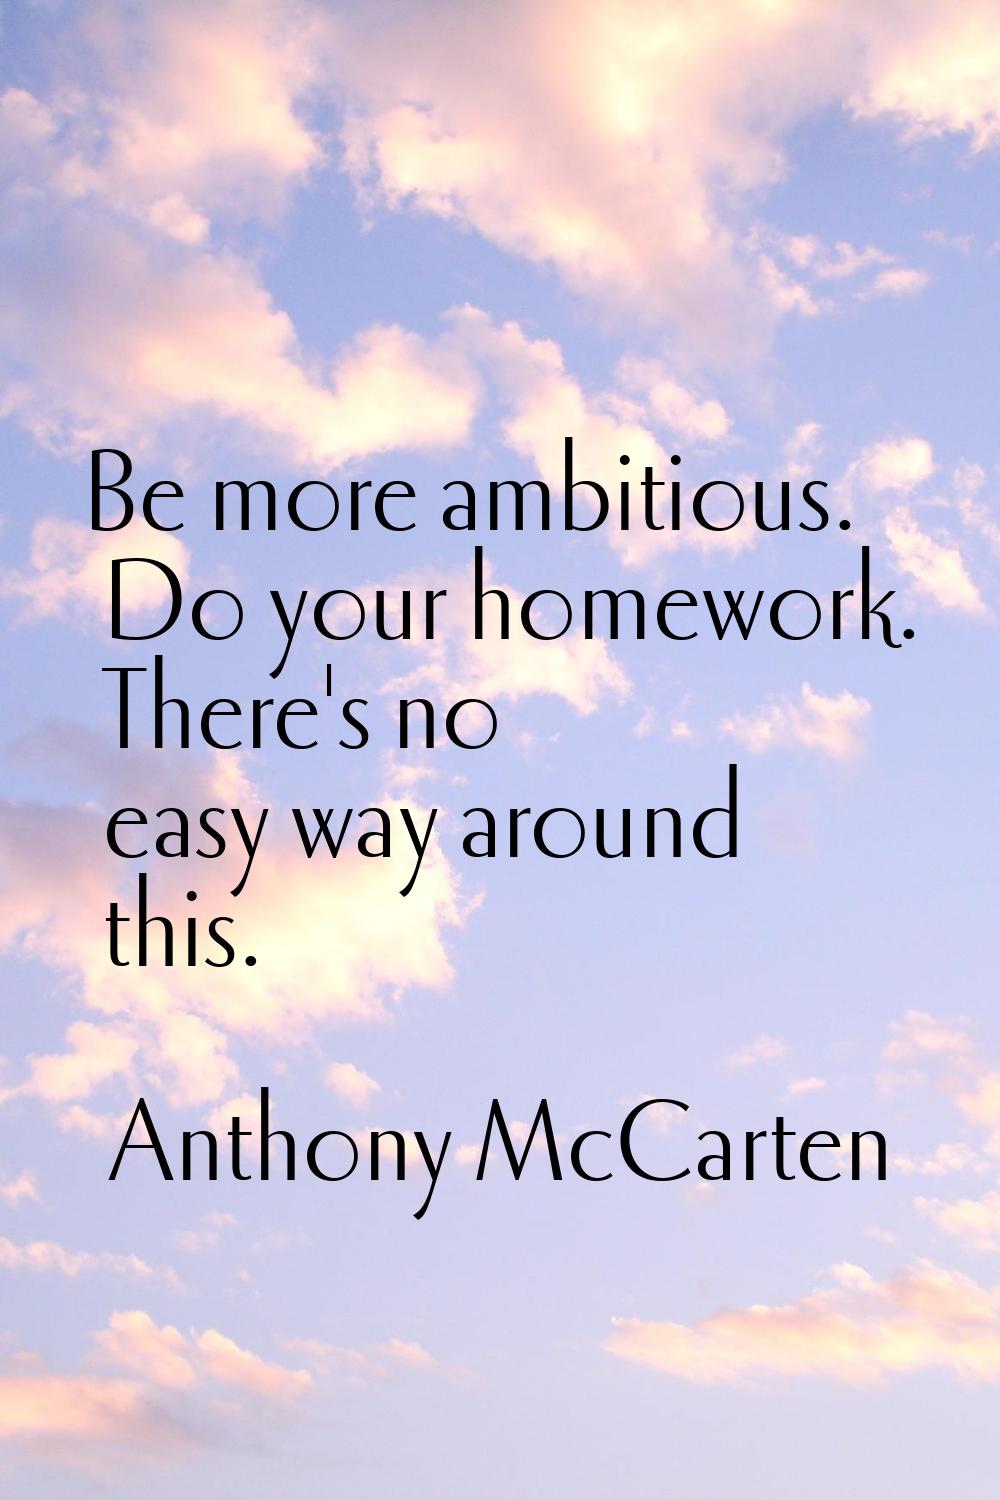 Be more ambitious. Do your homework. There's no easy way around this.